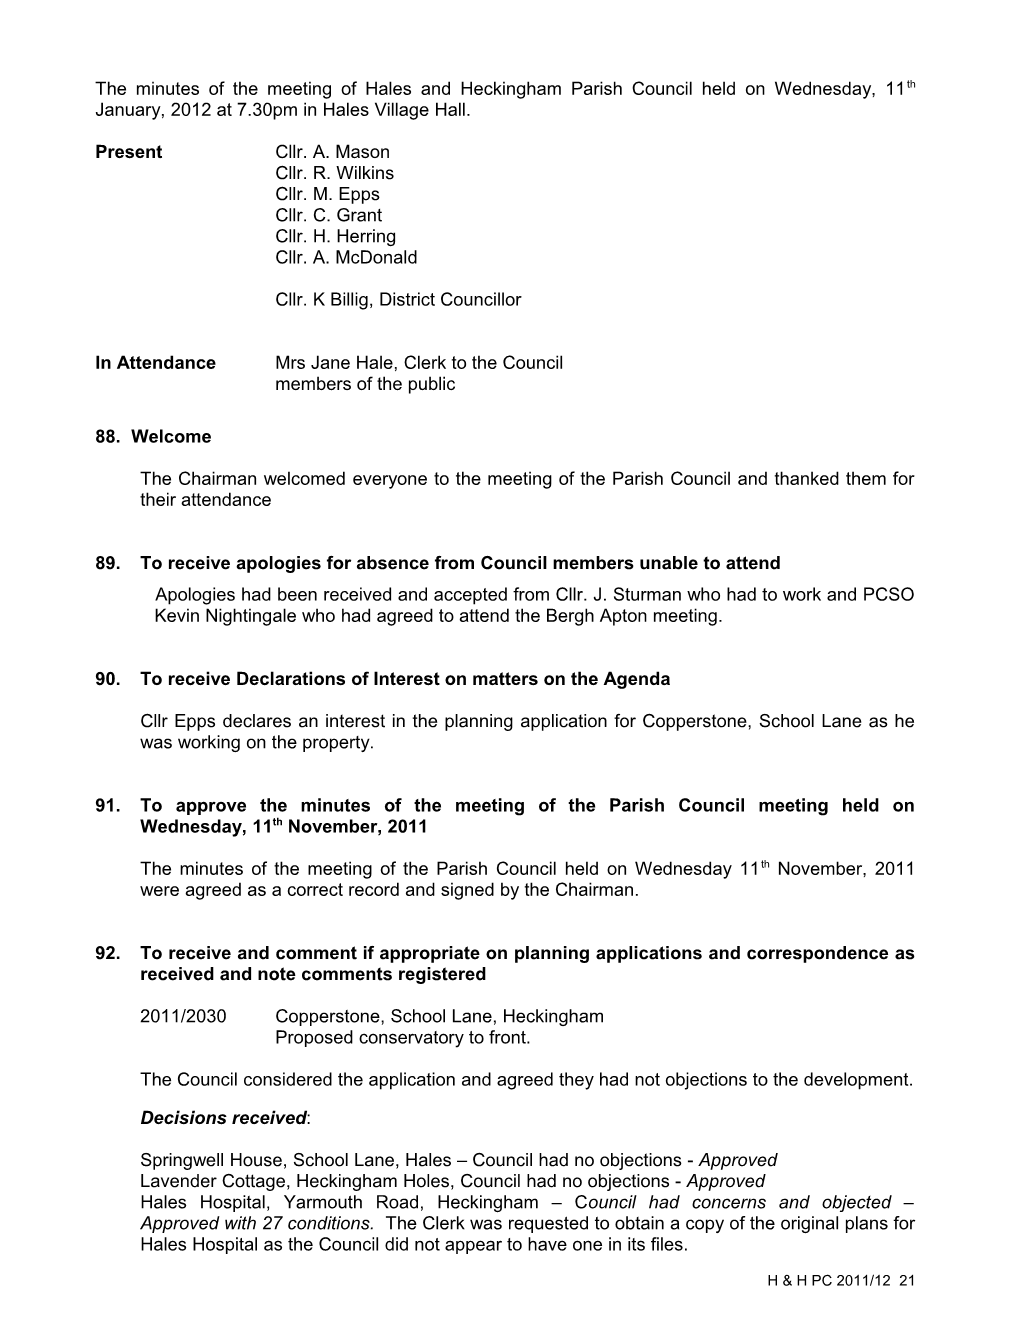 The Minutes of the Meeting of Hales and Heckingham Parish Council Held on Wednesday, 13Th